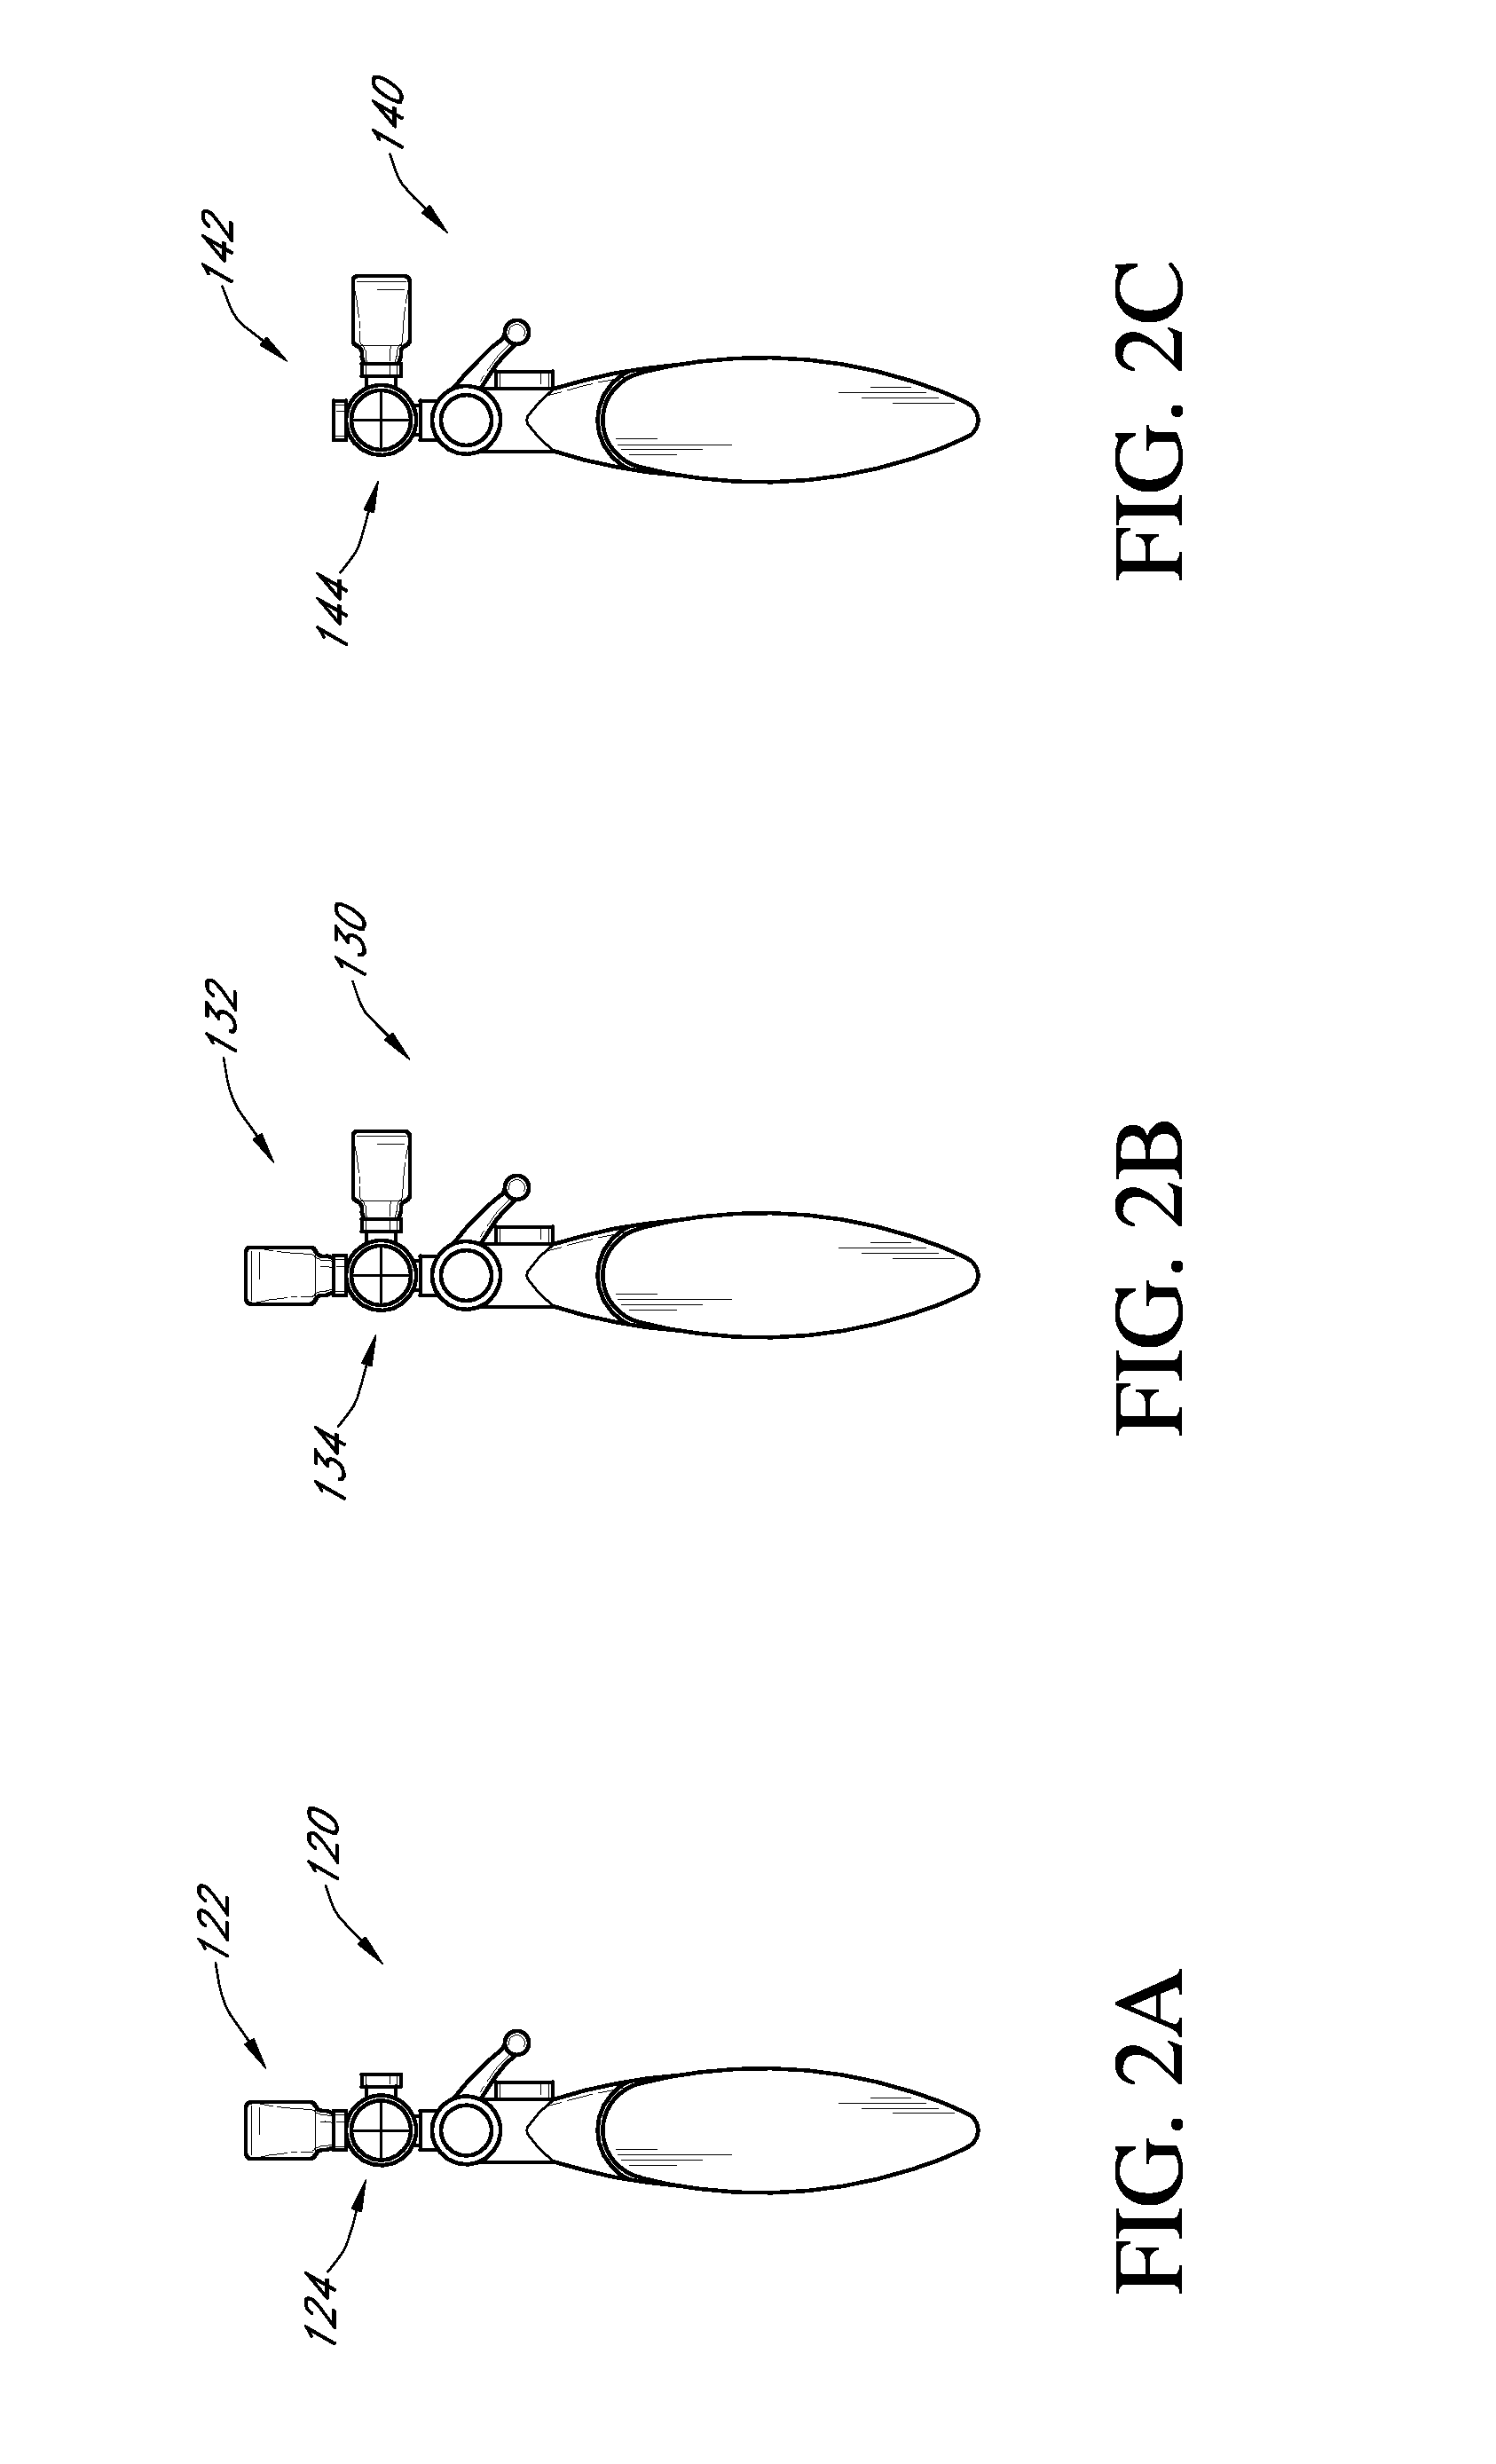 Projectile sighting and launching control system